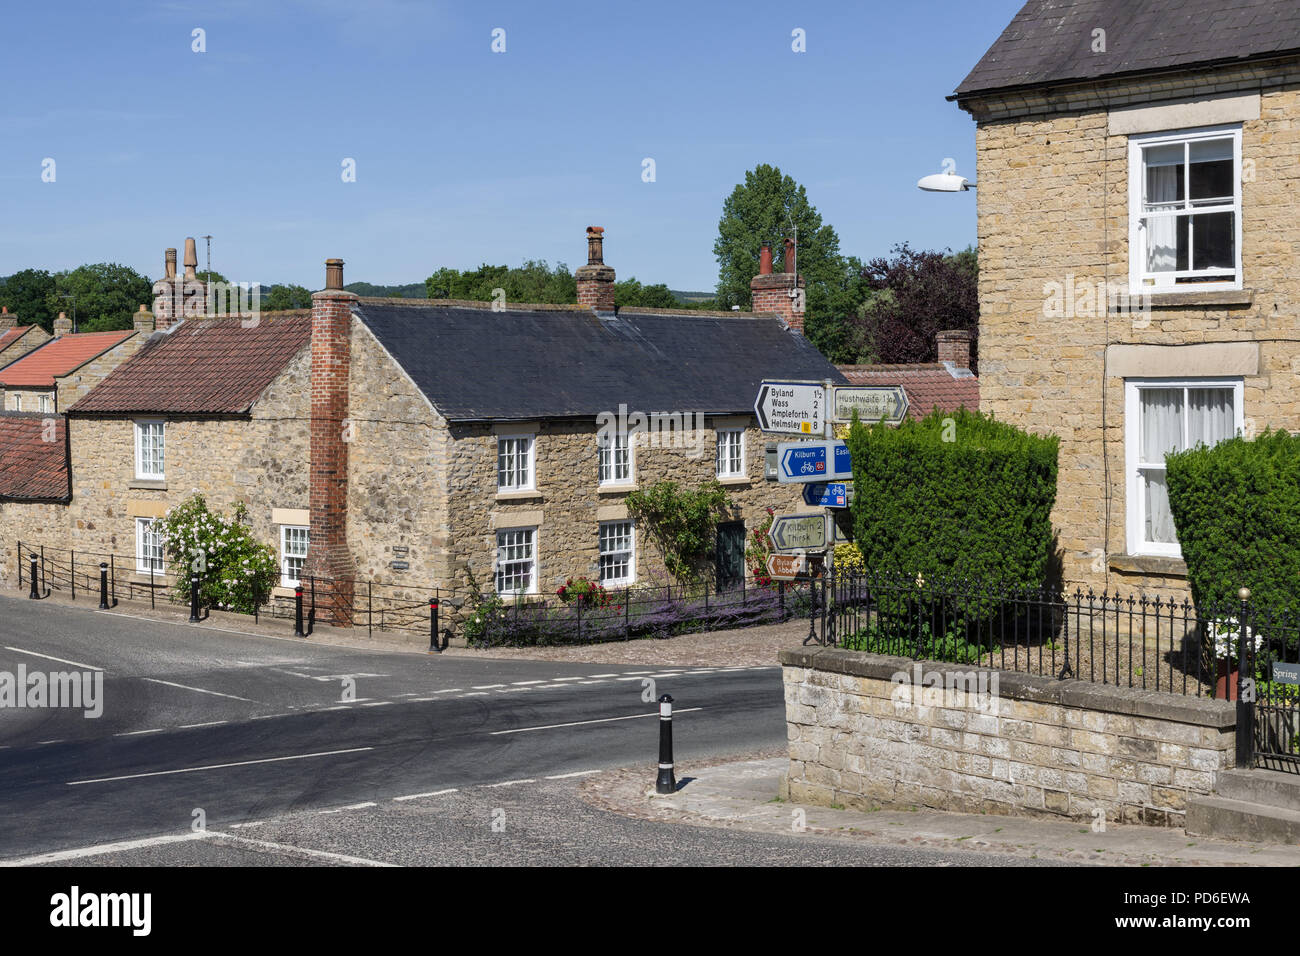 Crossroads in the pretty village of Coxwold, North Yorkshire, UK Stock Photo